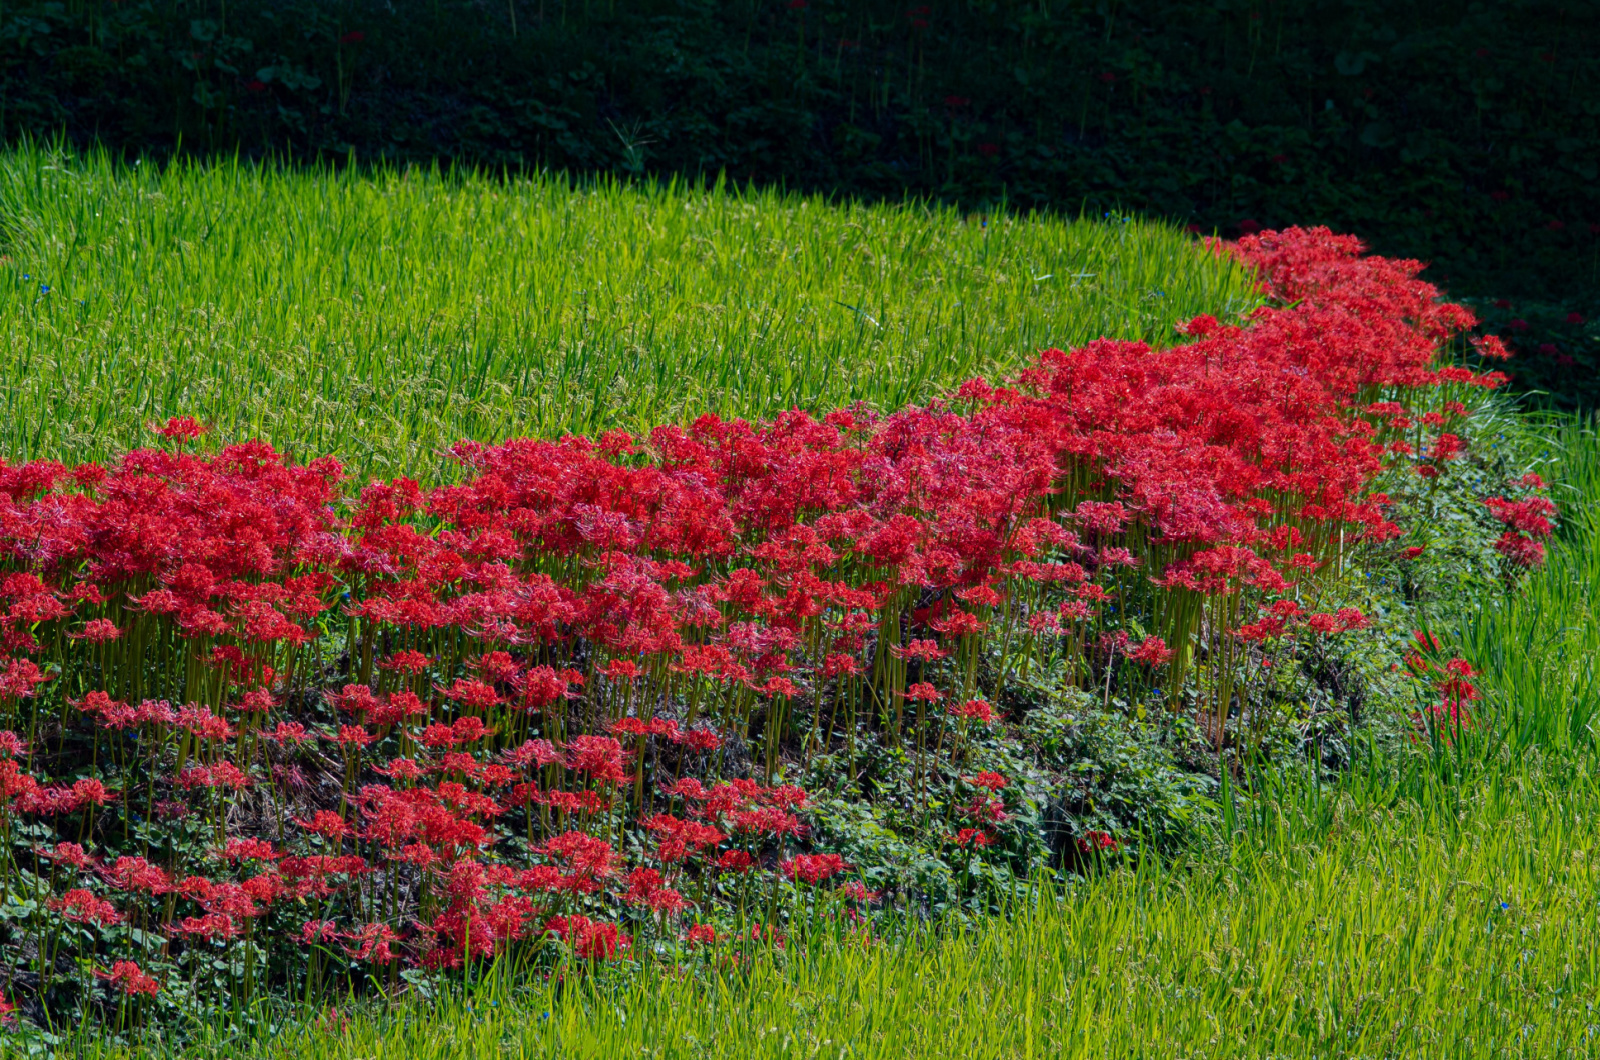 The field of red spider lilies